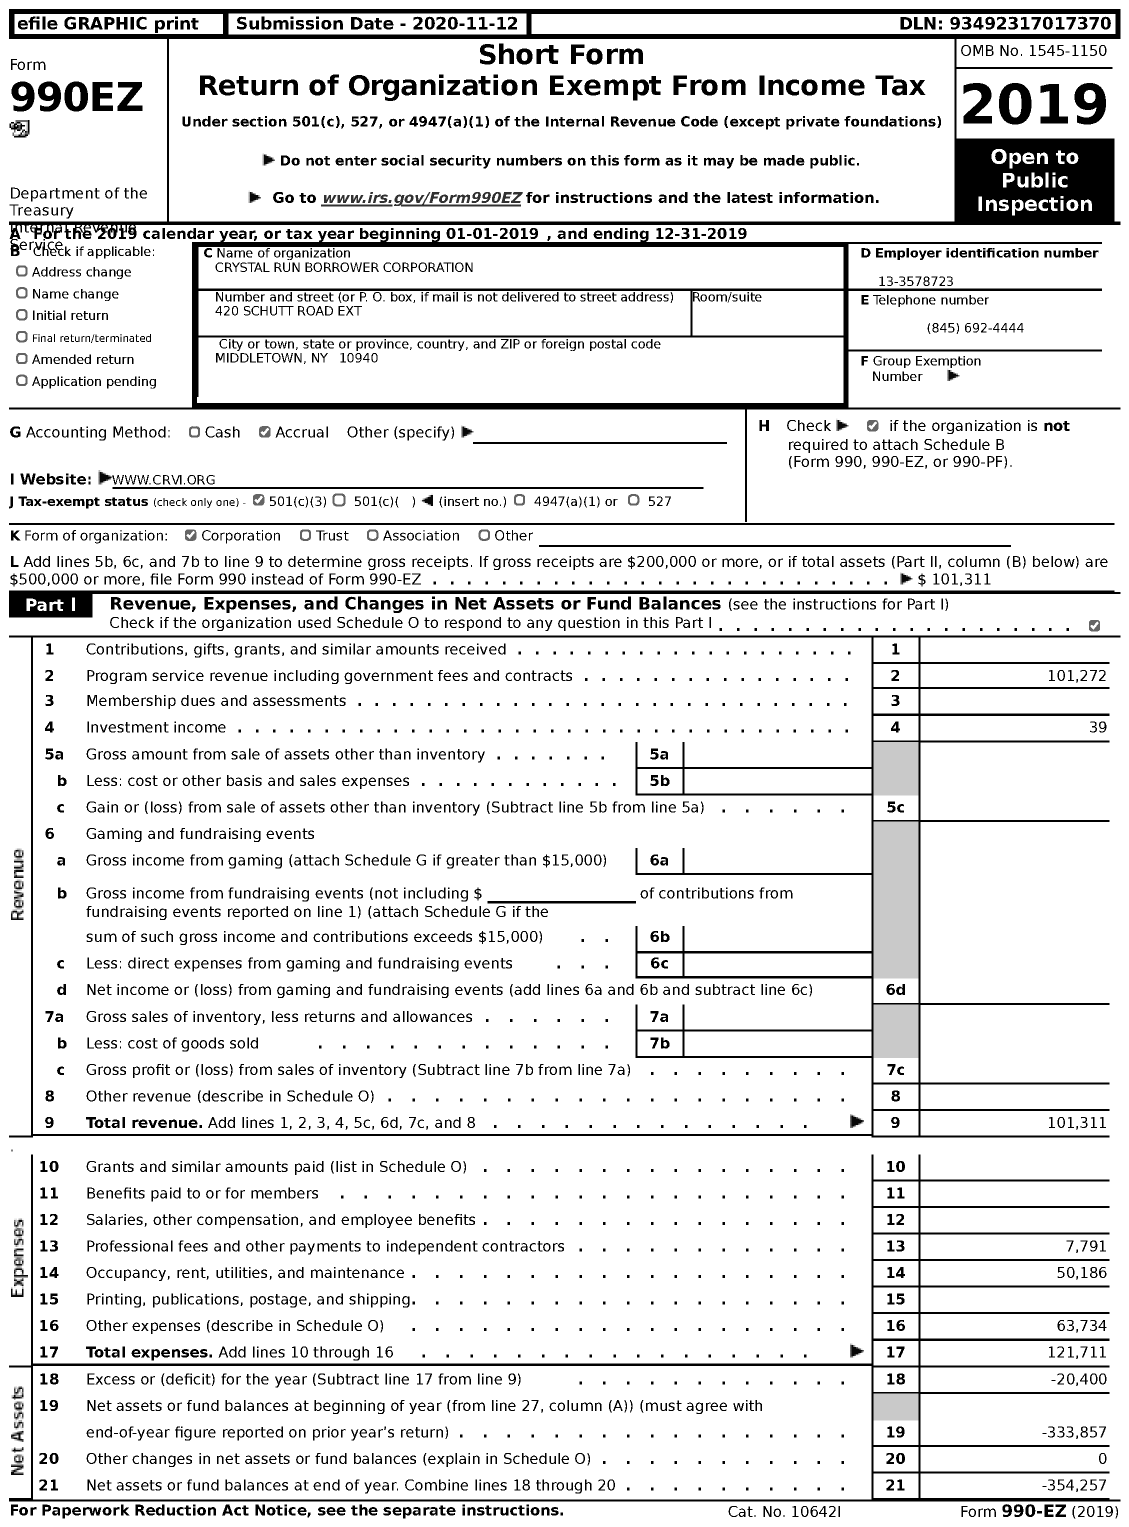 Image of first page of 2019 Form 990EZ for Crystal Run Borrower Corporation